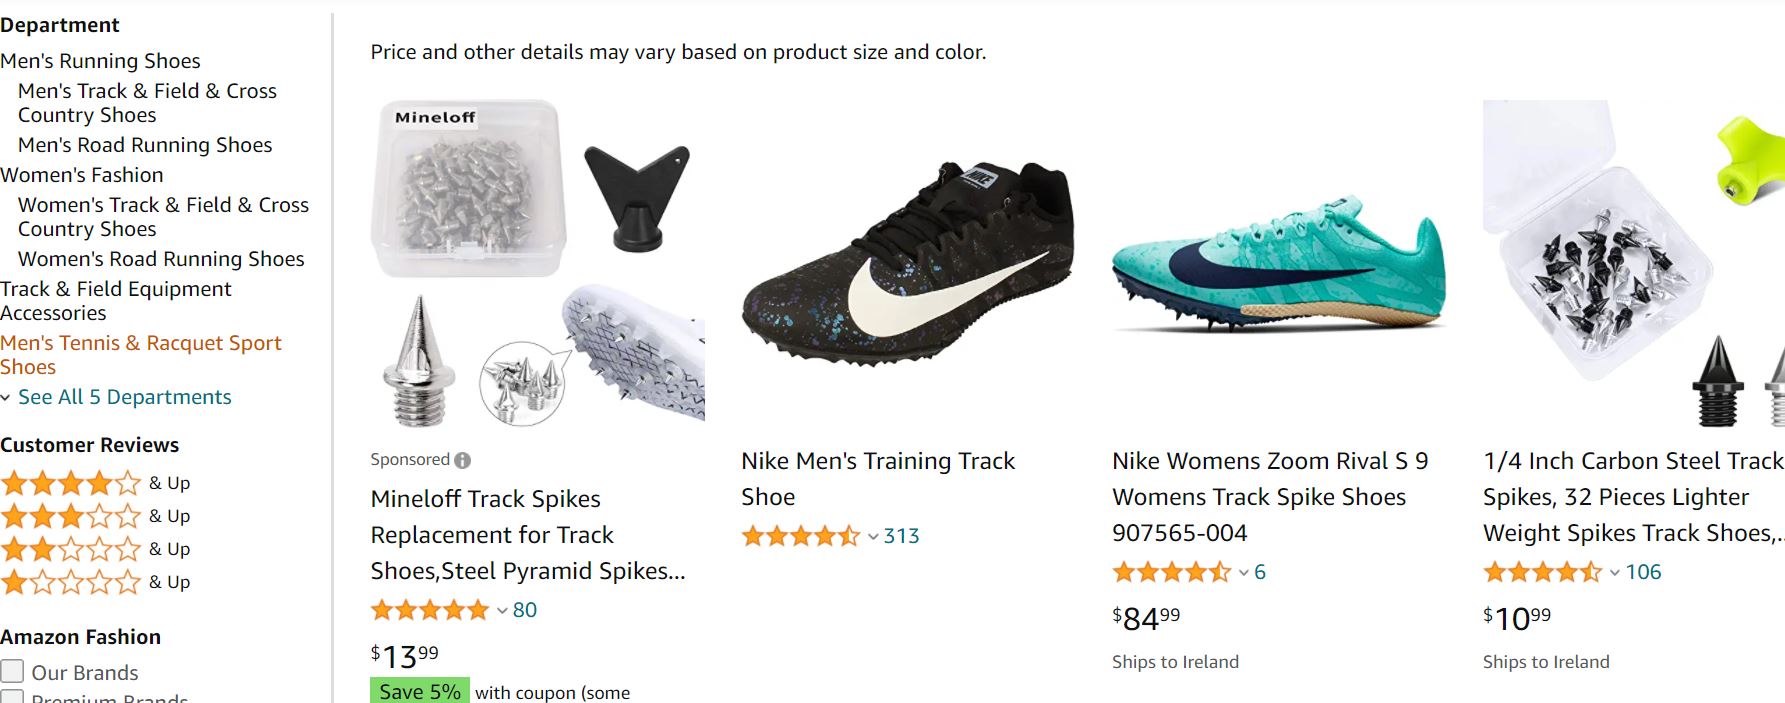 what to sell on amazon fba - sprinting shoes